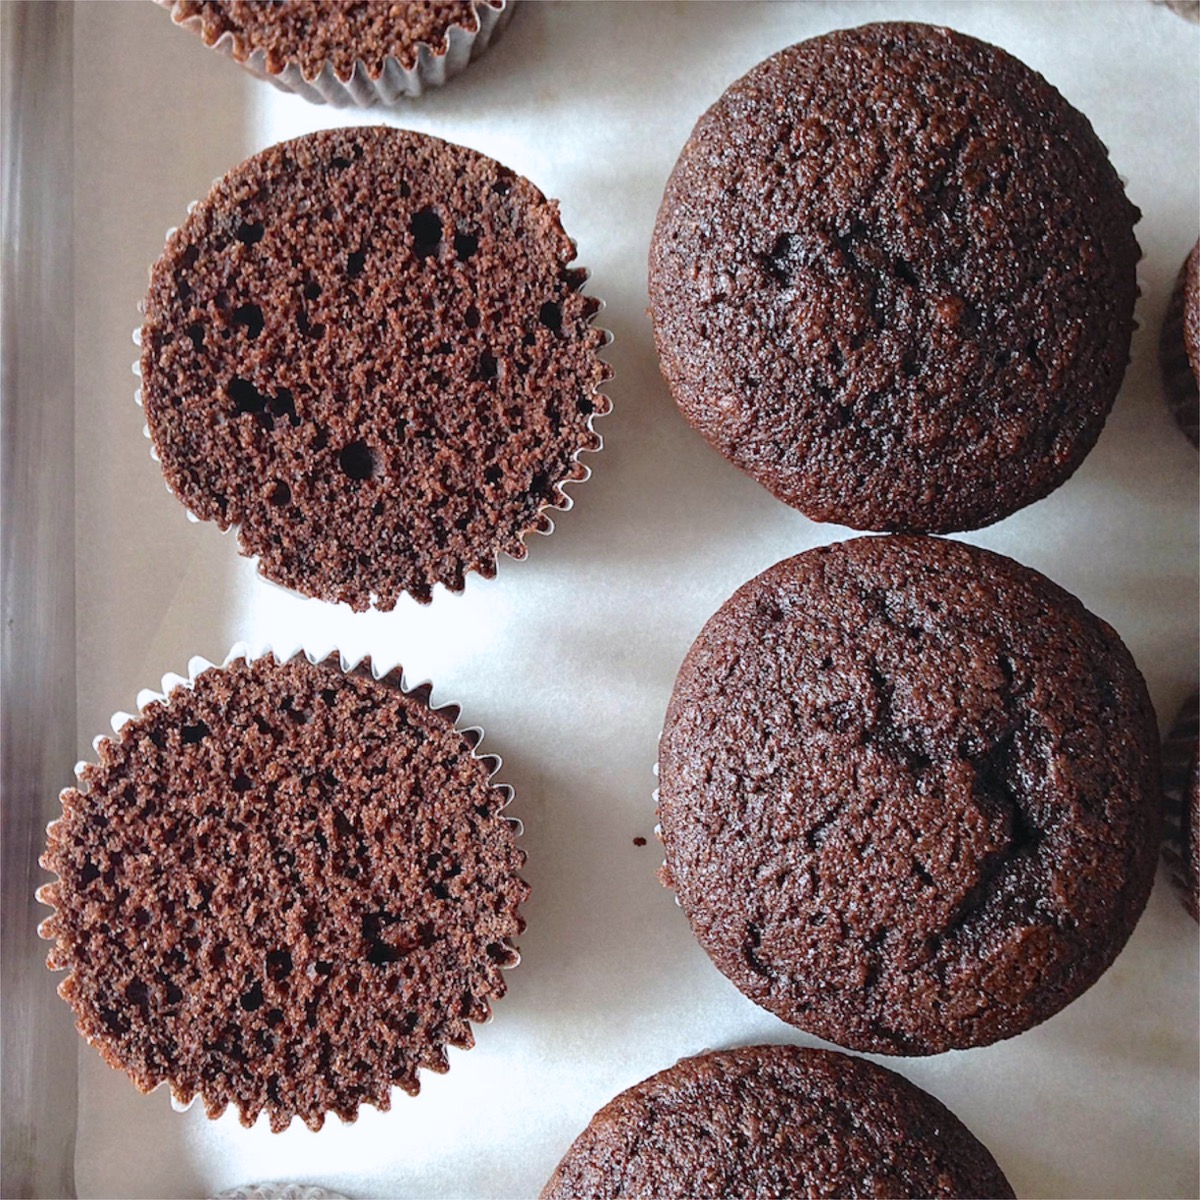 Chocolate cupcakes cut open to reveal interior texture and color.